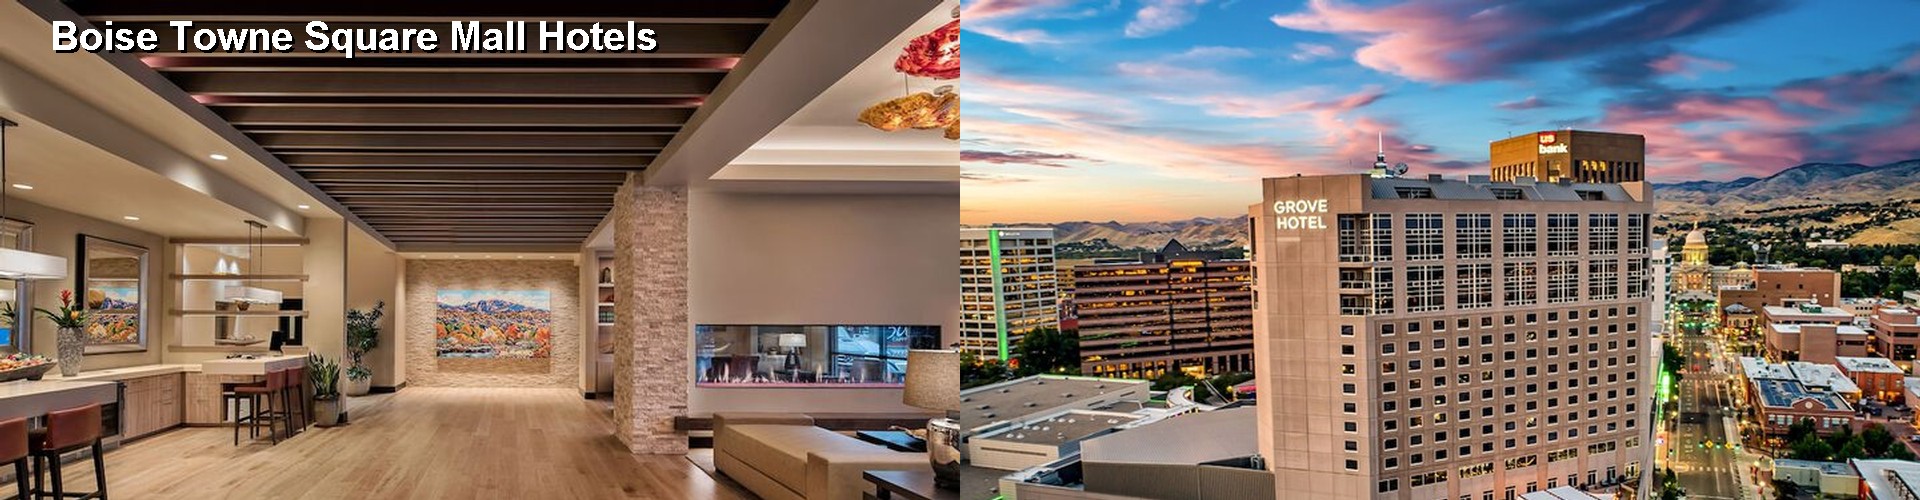 5 Best Hotels near Boise Towne Square Mall